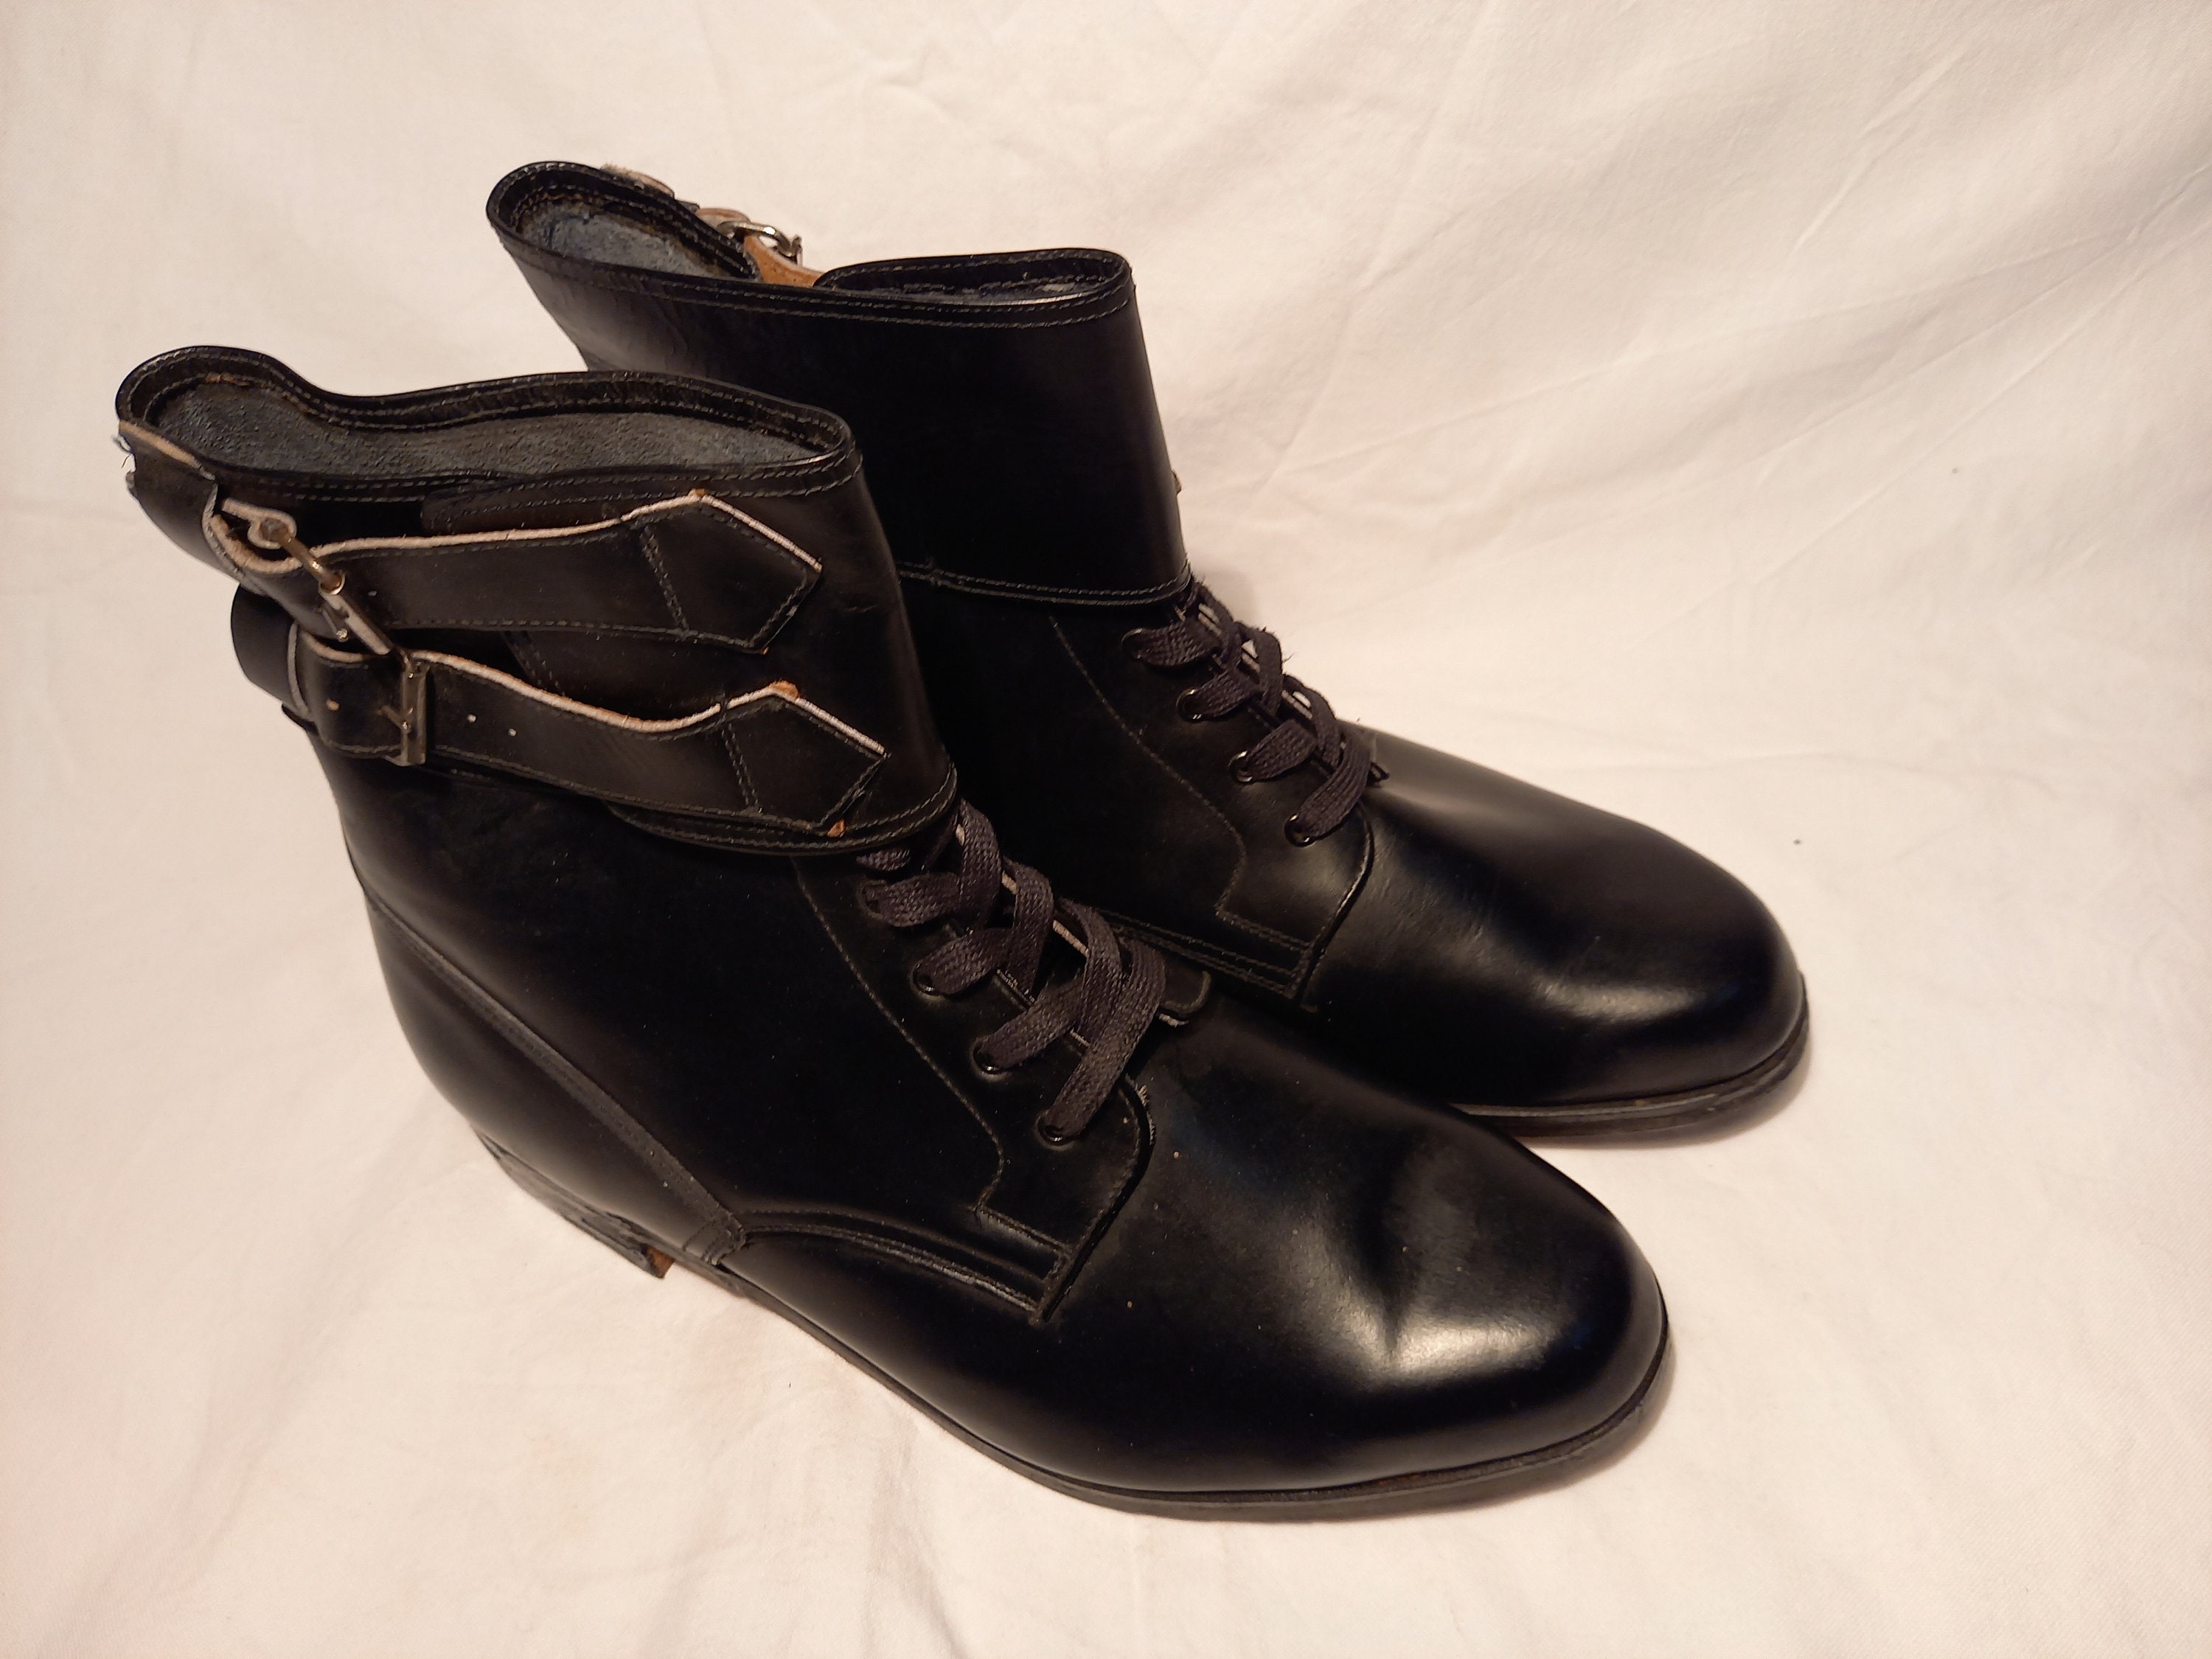 Vintage 1960 's Bulgarian Army Black Leather Officer's - Etsy UK